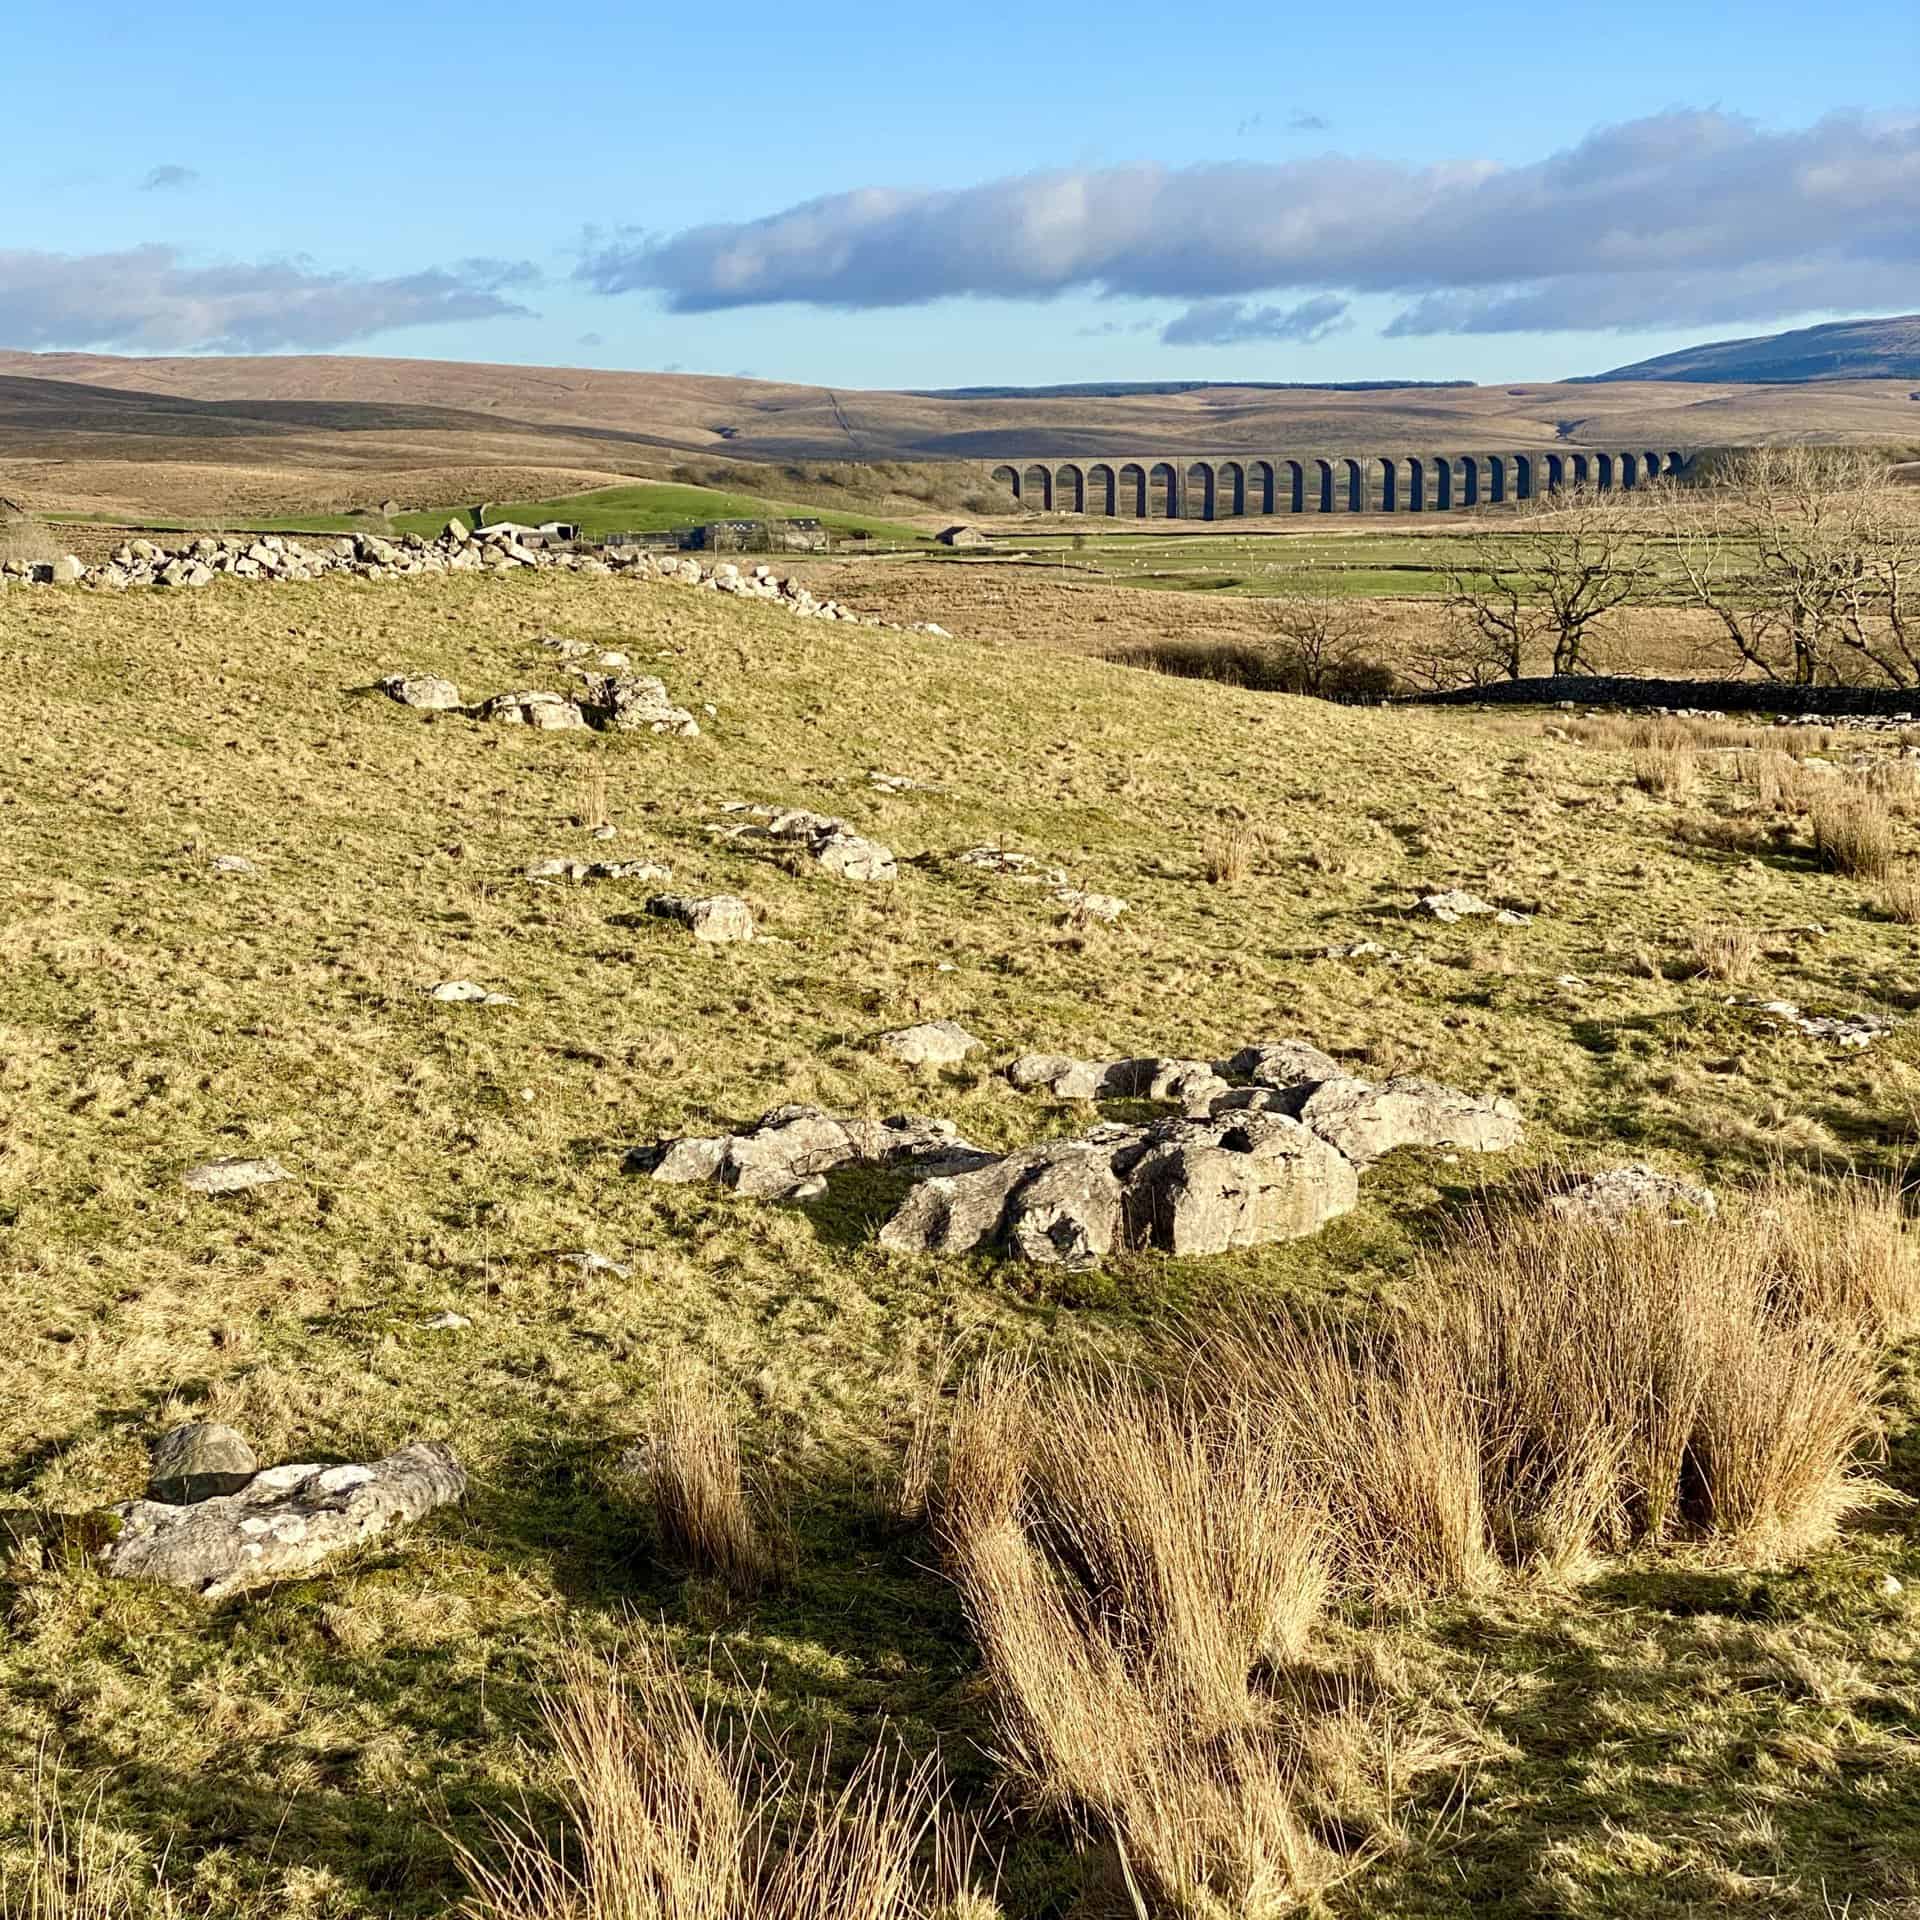 Ribblehead Viaduct as seen from the path between Broadrake and Ivescar.